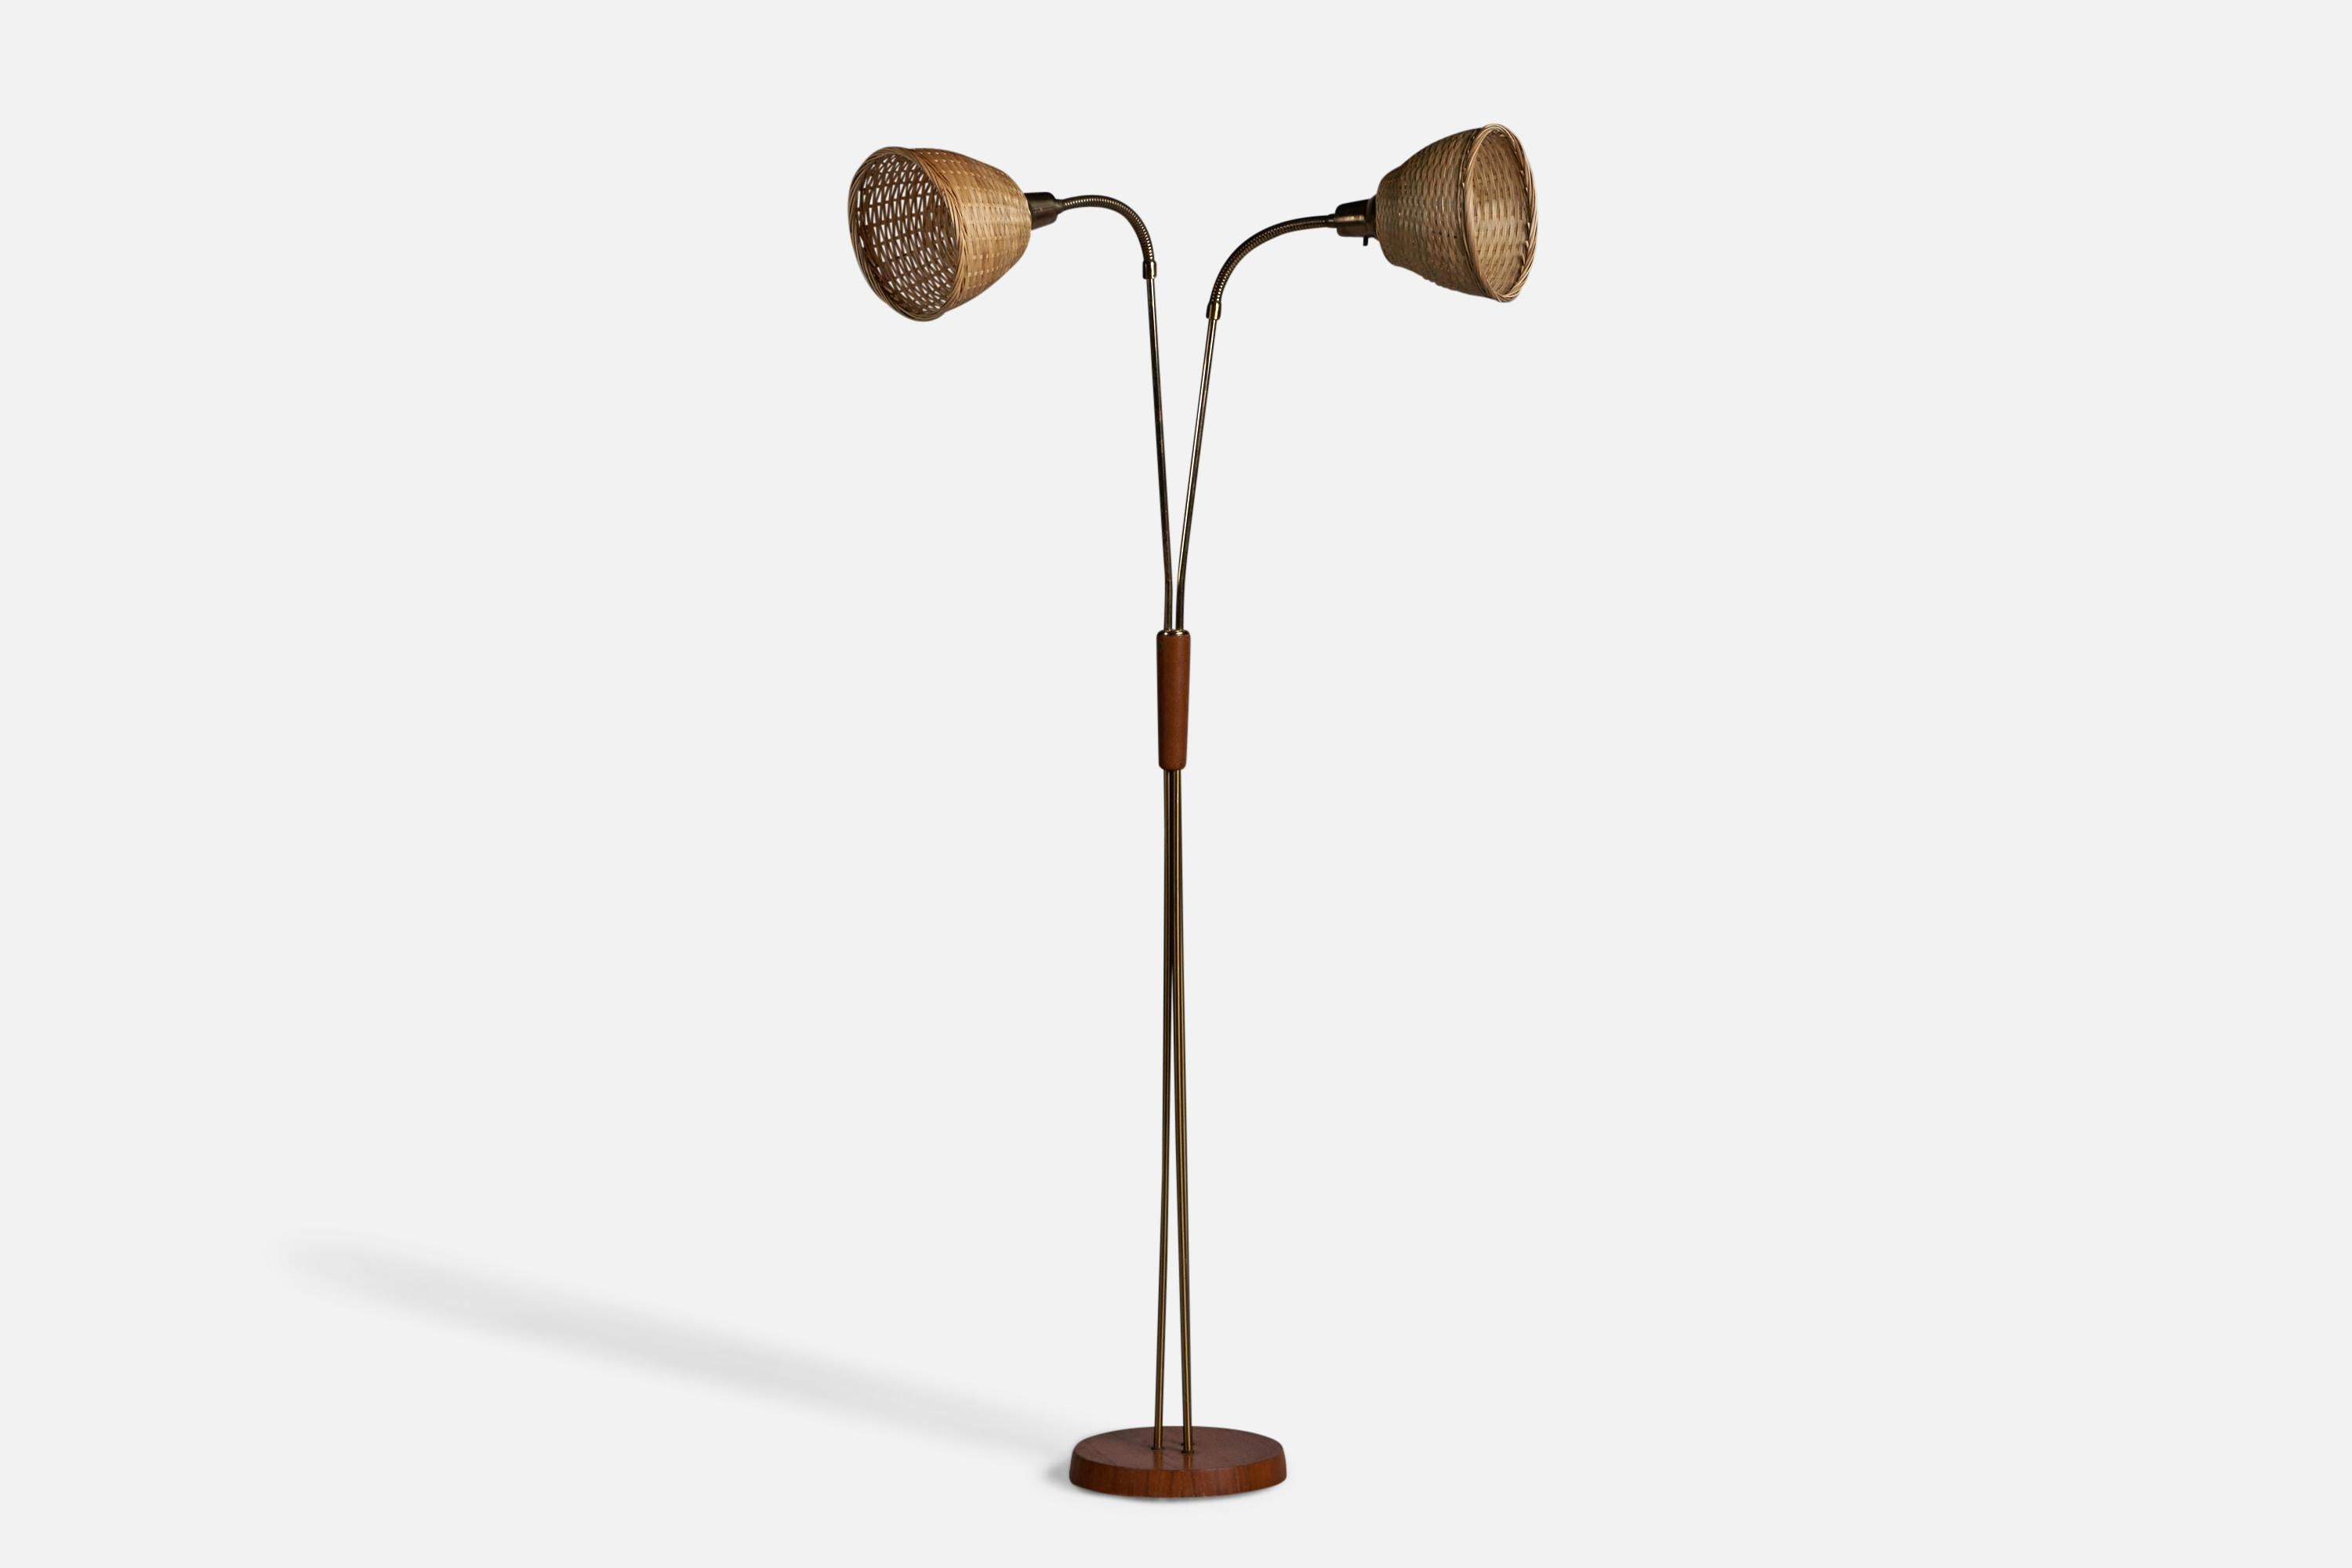 An adjustable teak, brass and rattan floor lamp, designed and produced in Sweden, 1950s.

Overall Dimensions (inches): 53.75